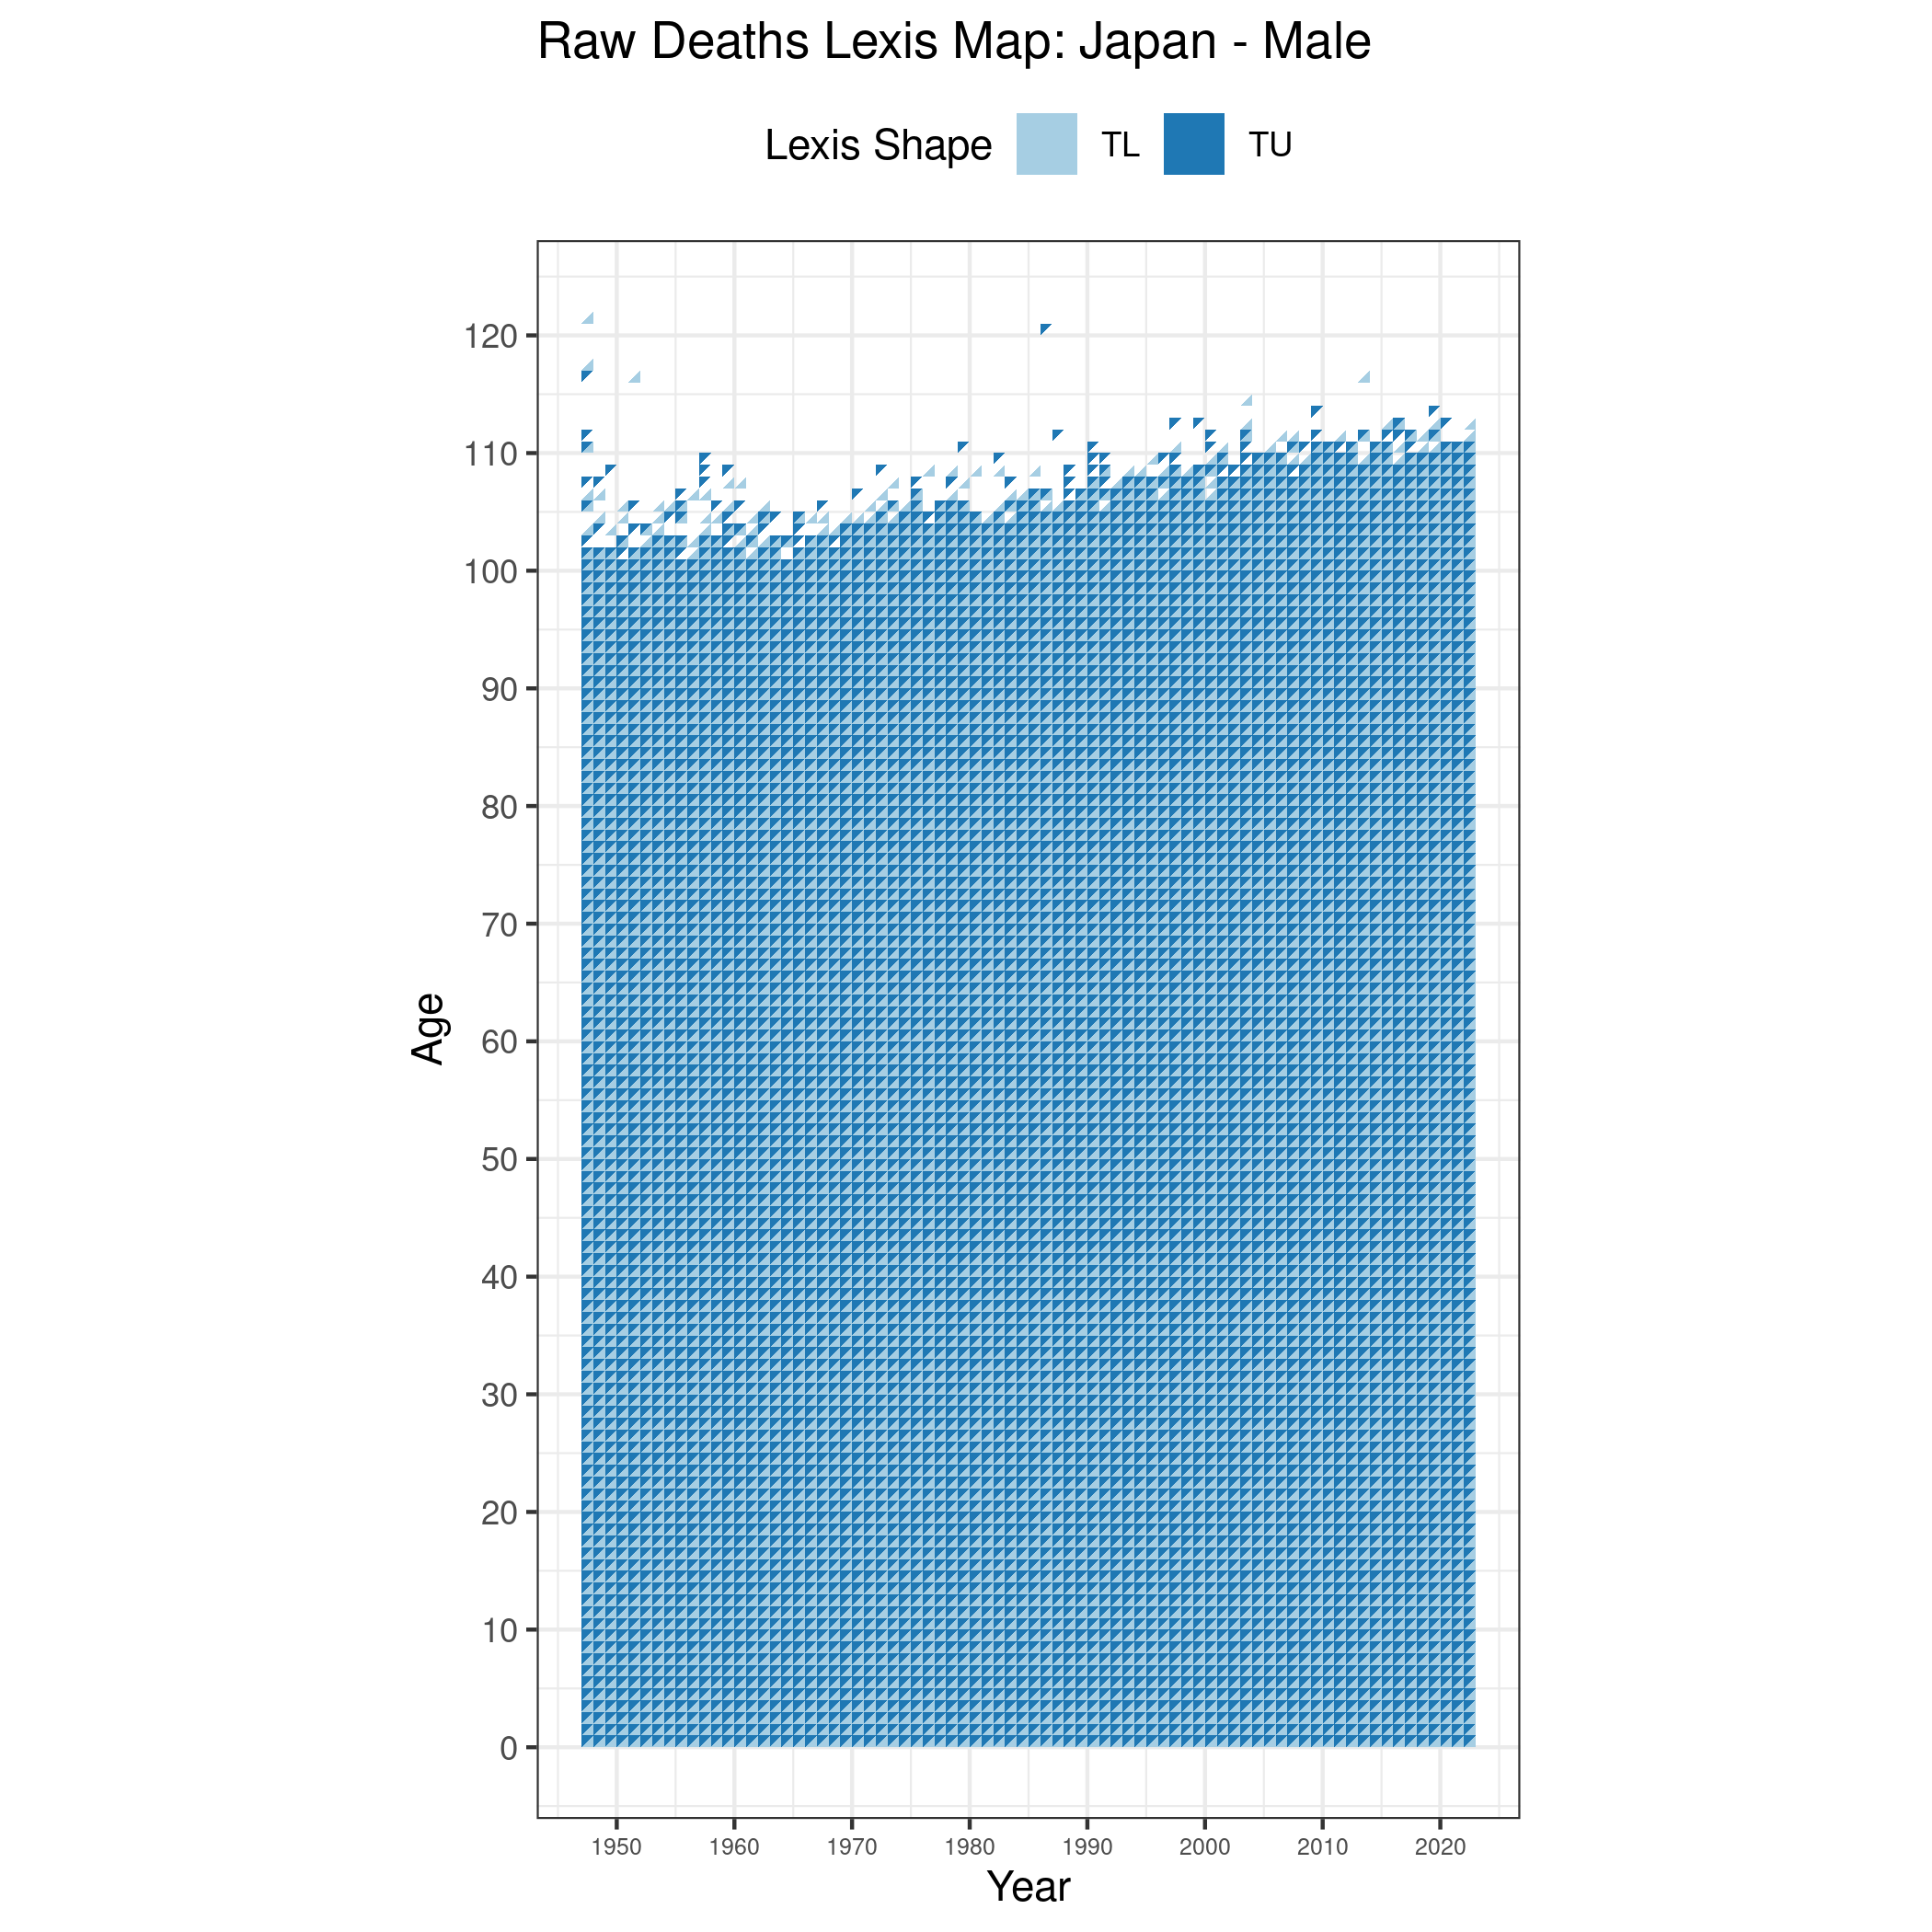  [ Raw deaths counts - Males ] 